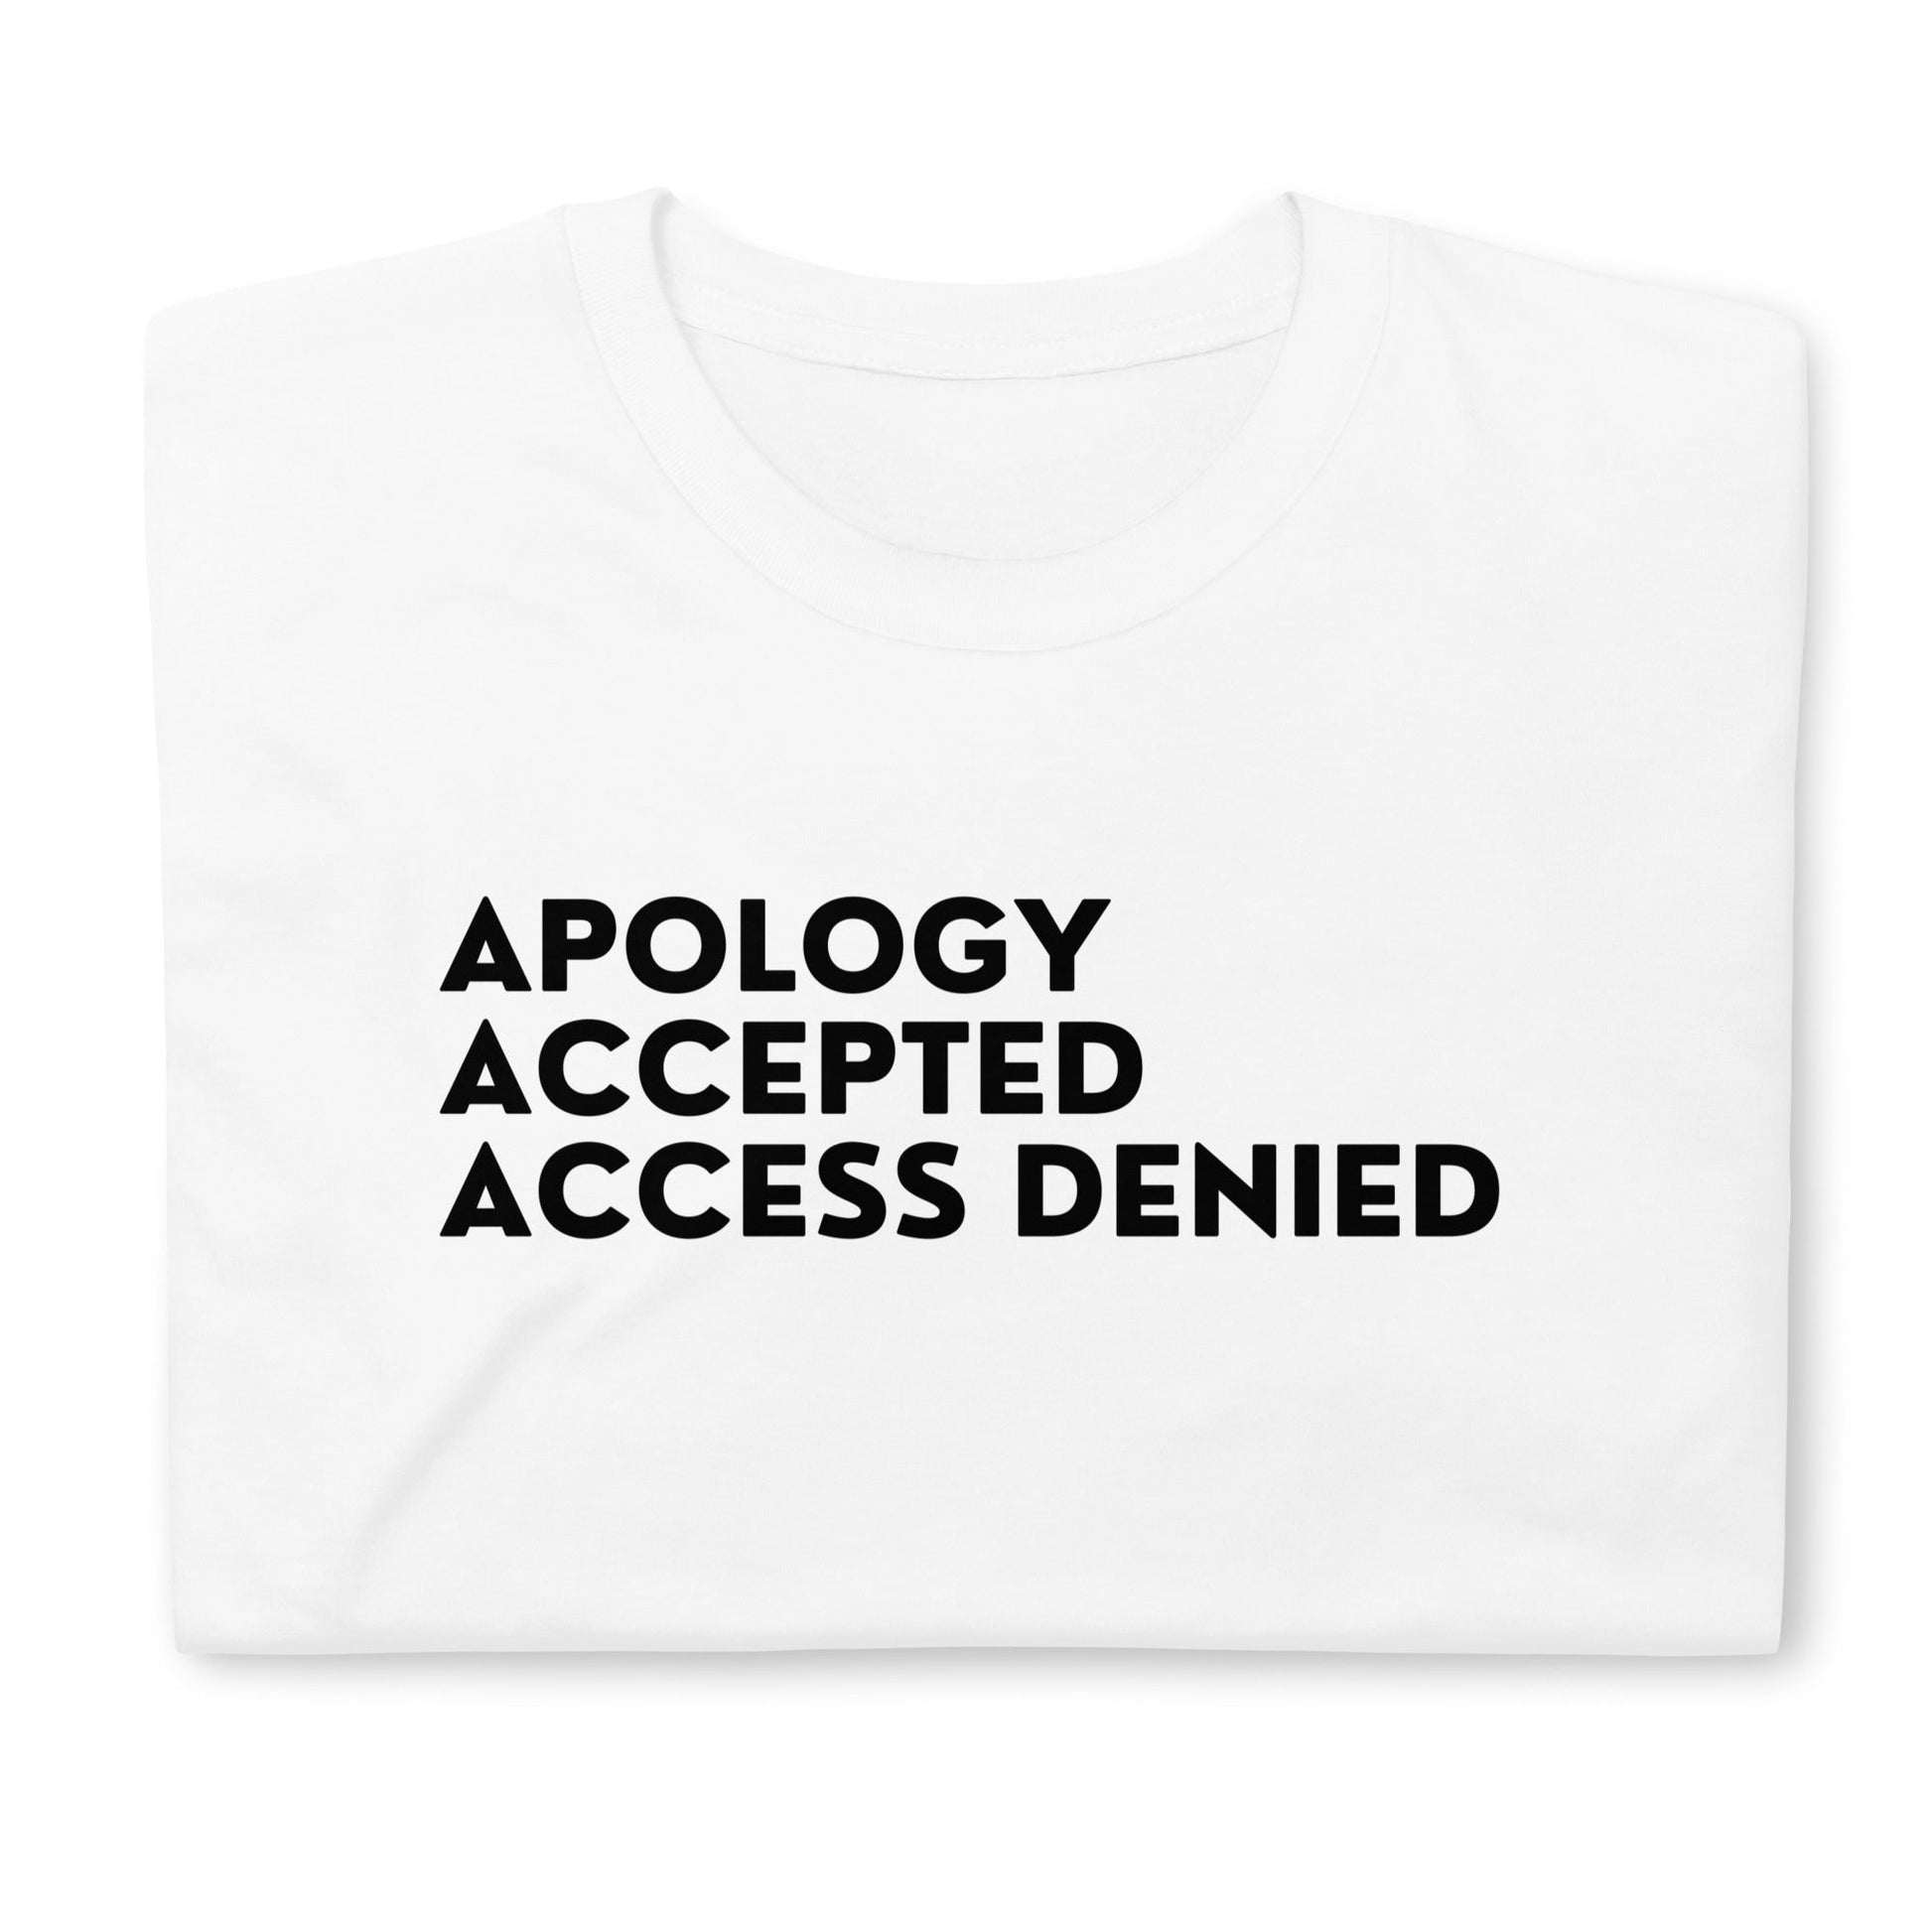 Apology Accepted Access Denied Short-Sleeve Unisex T-Shirt (For a Slim Fit Order a Size Down) - Catch This Tea Shirts